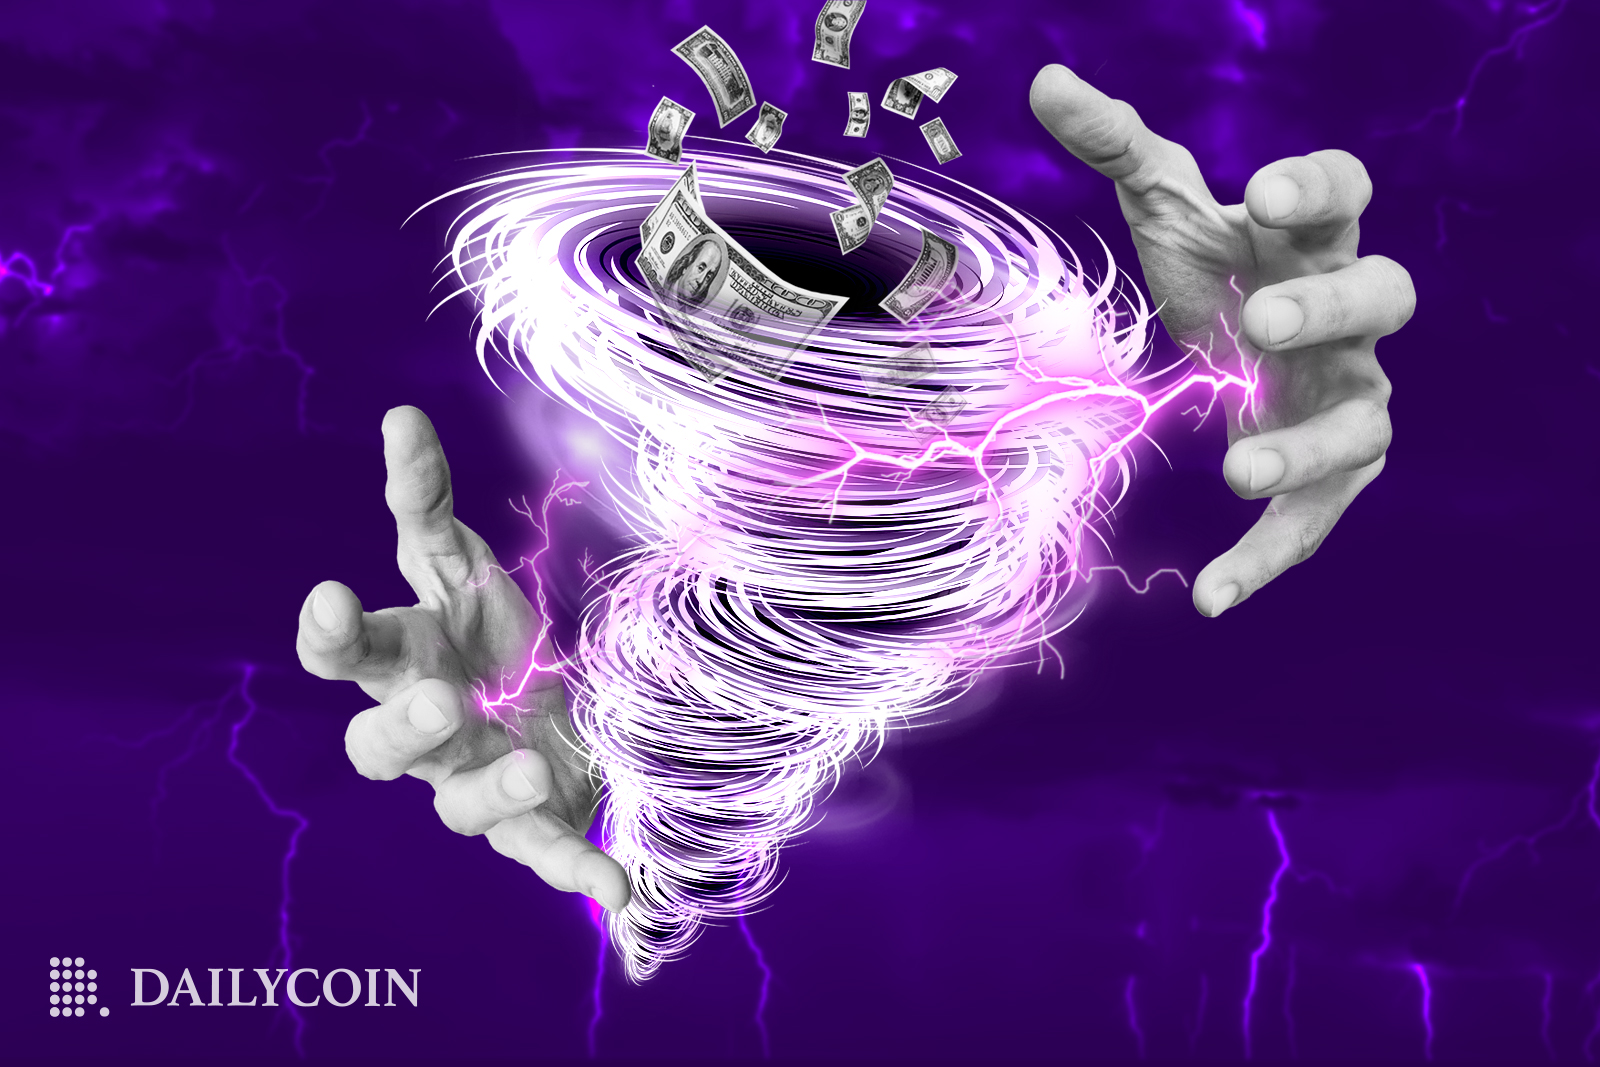 Deribit Hackers Move Stolen Ether (ETH) to the Blacklisted mixing service, Tornado Cash